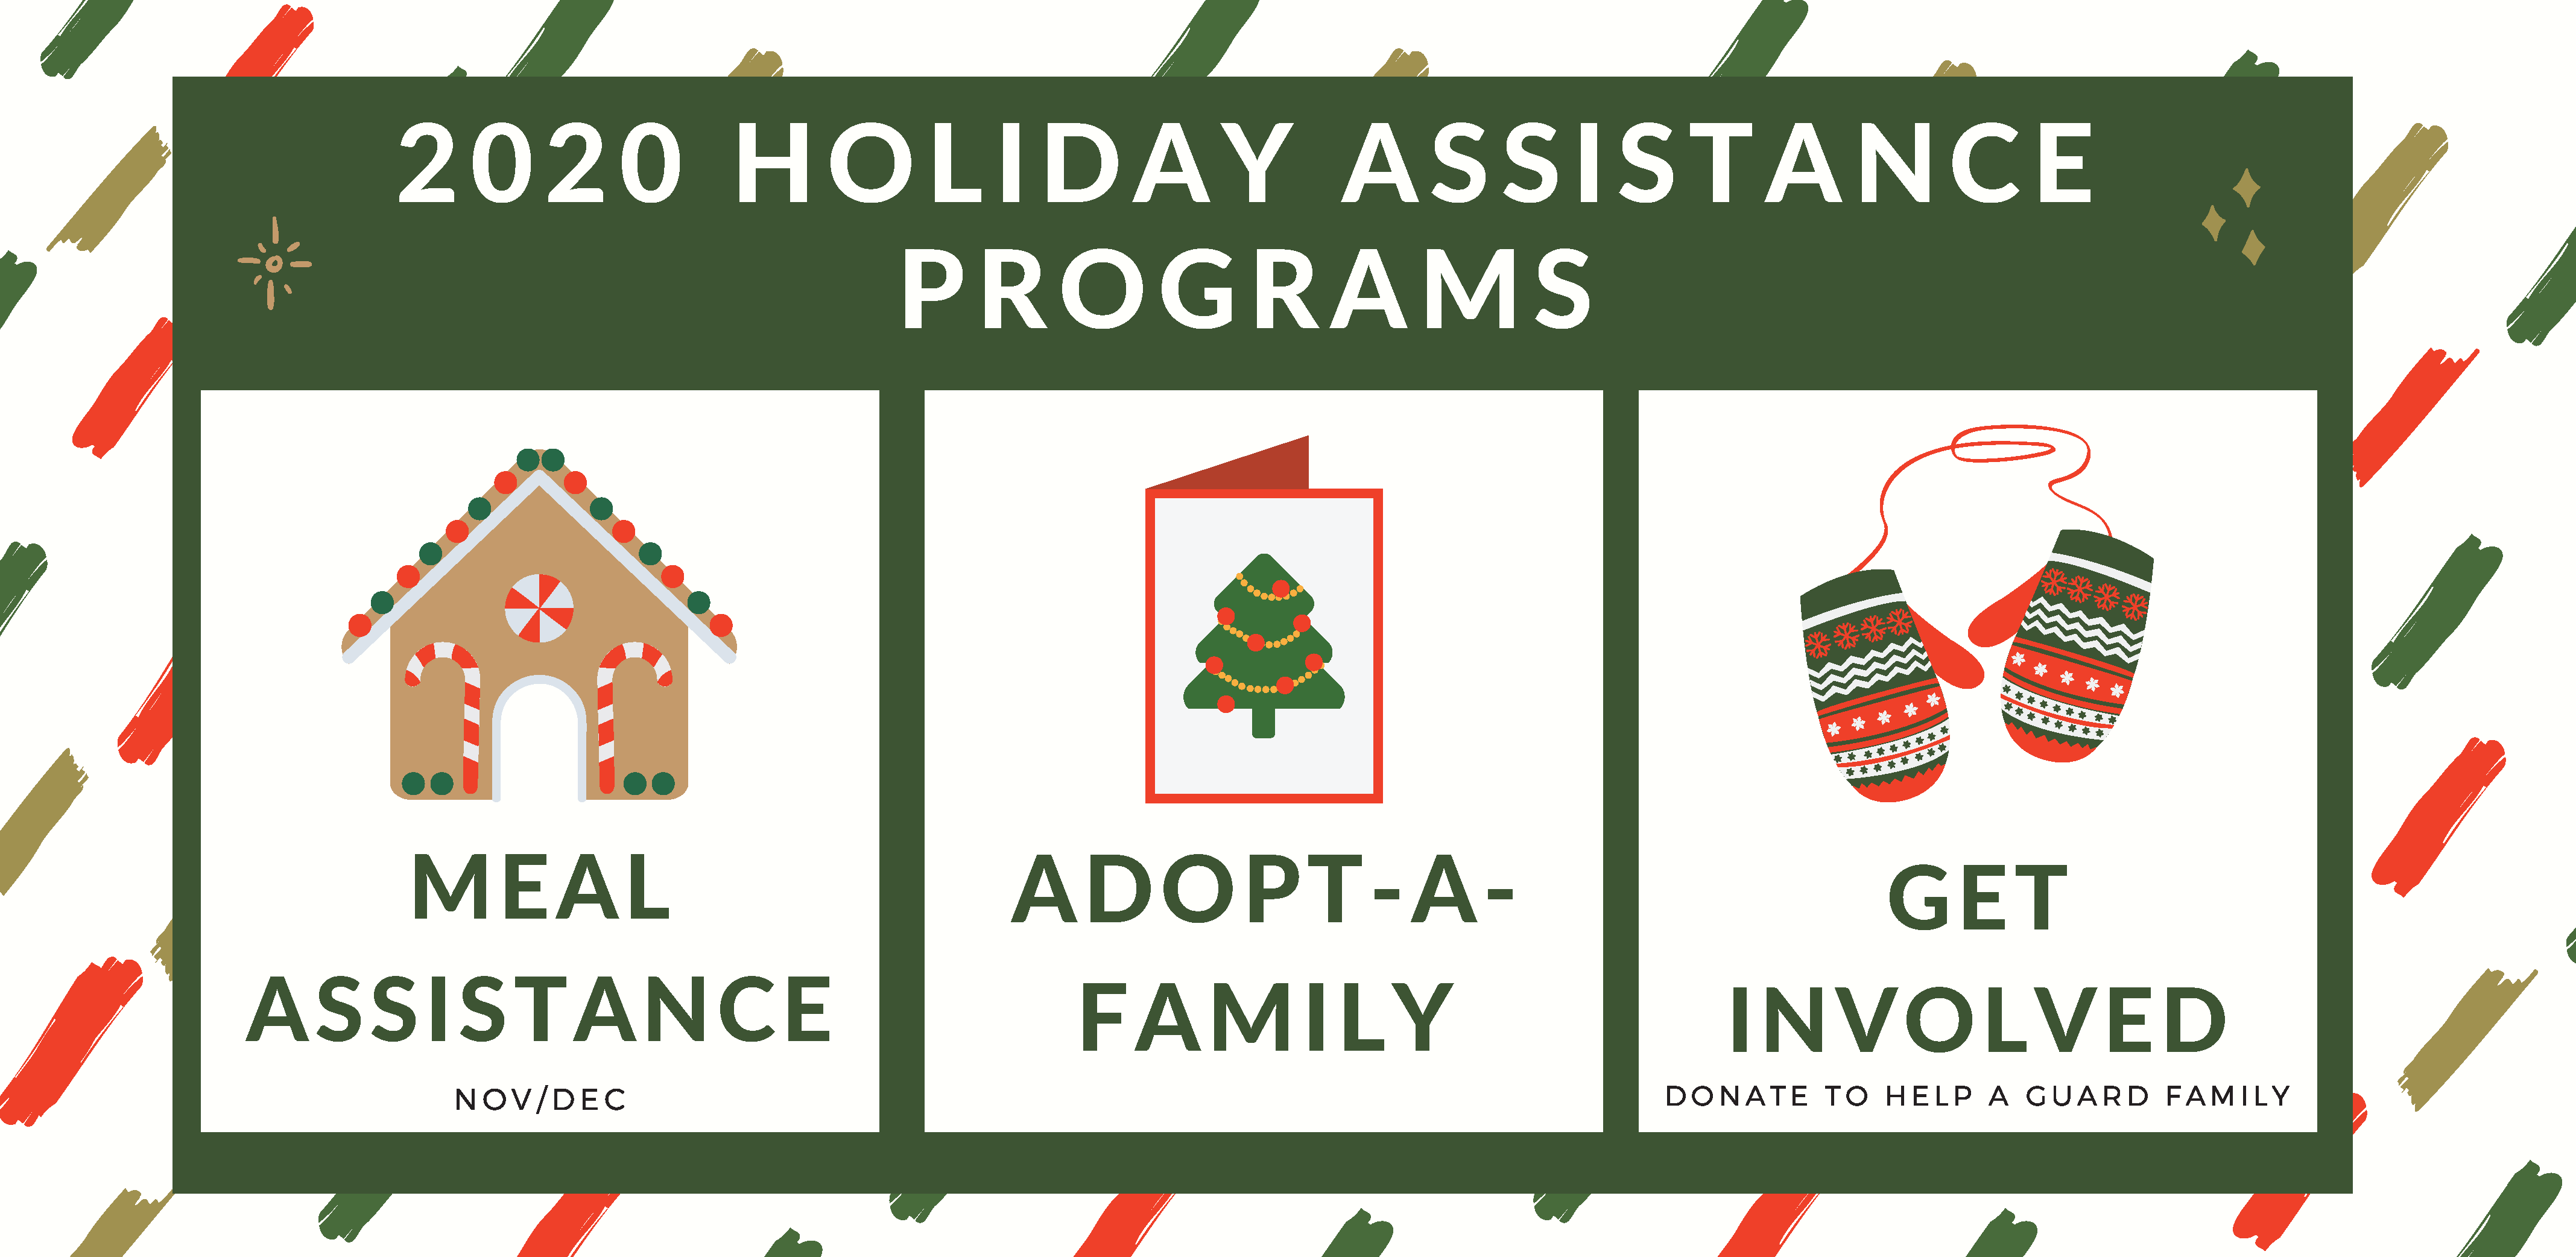 Holiday Assistance